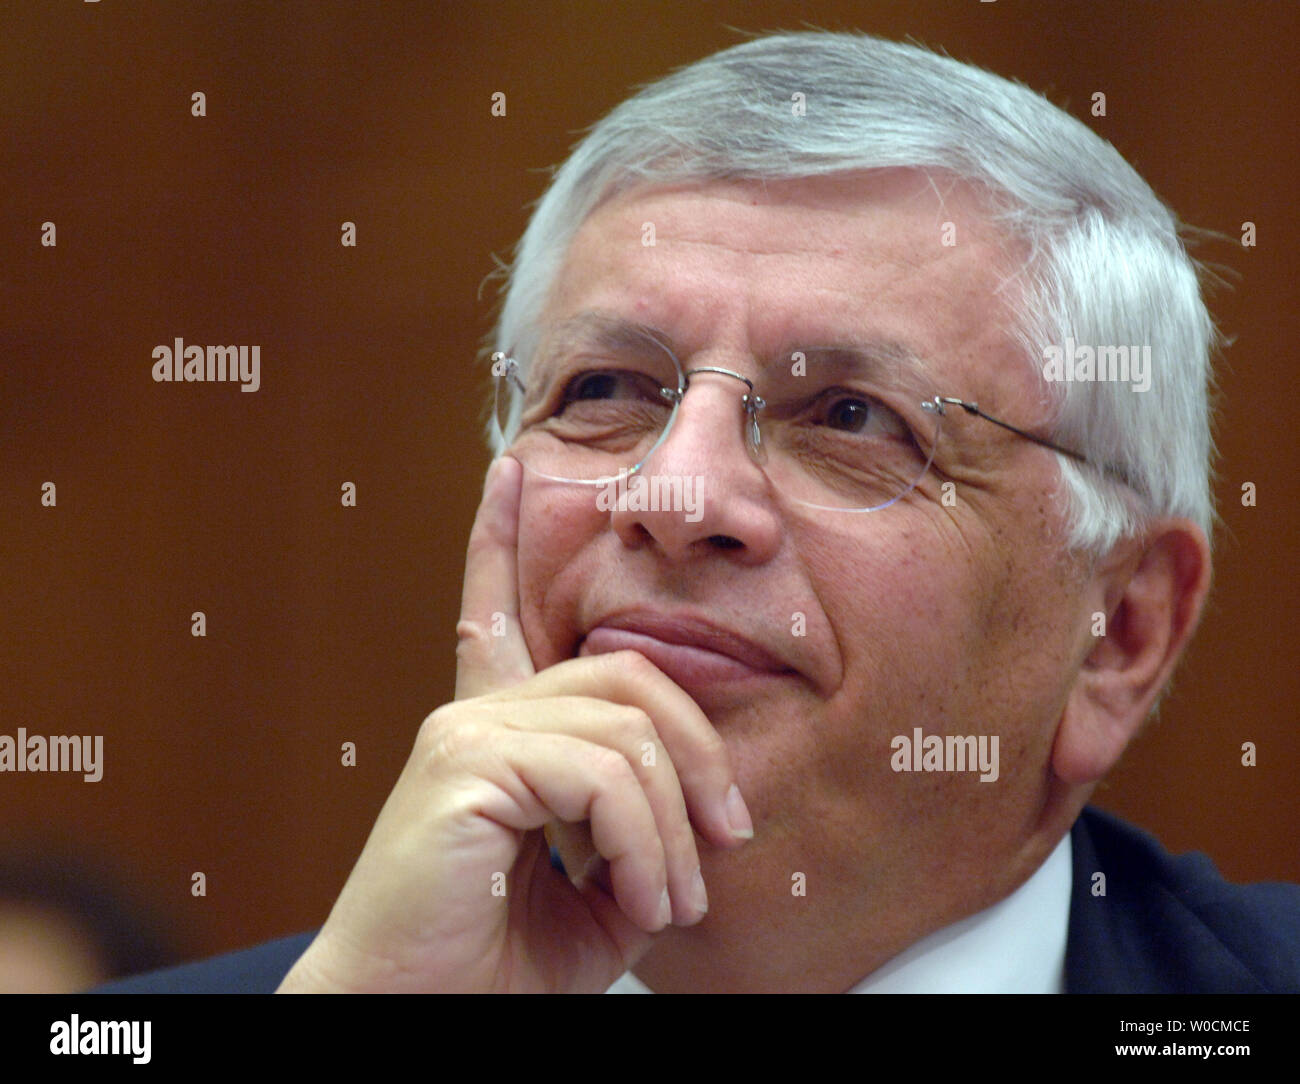 David Stern, Commissioner of the NBA testifies before the House Government Reform Committee hearing on steroid use in the National Basketball Association and their steroid testing program, on May 19, 2005 in Washington.  Stern said that NBA players would not benefit from use of steroids, and therefore a more strict policy is not necessary. (UPI Photo/Michael Kleinfeld) Stock Photo